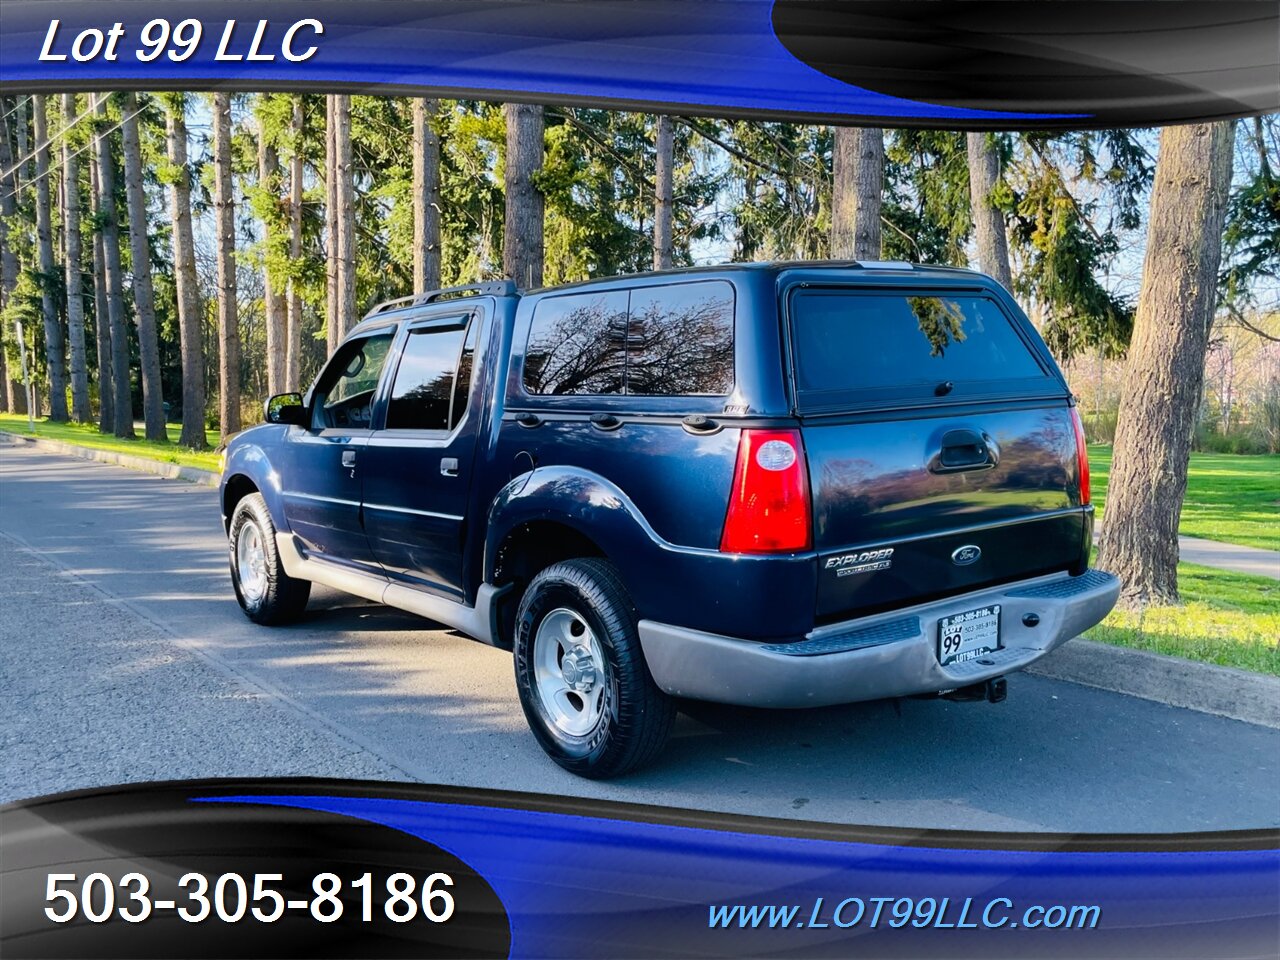 2003 Ford Explorer Sport Trac XLS 4x4  1-OWNER 117k  NEW TIRES  Canopy   - Photo 8 - Milwaukie, OR 97267